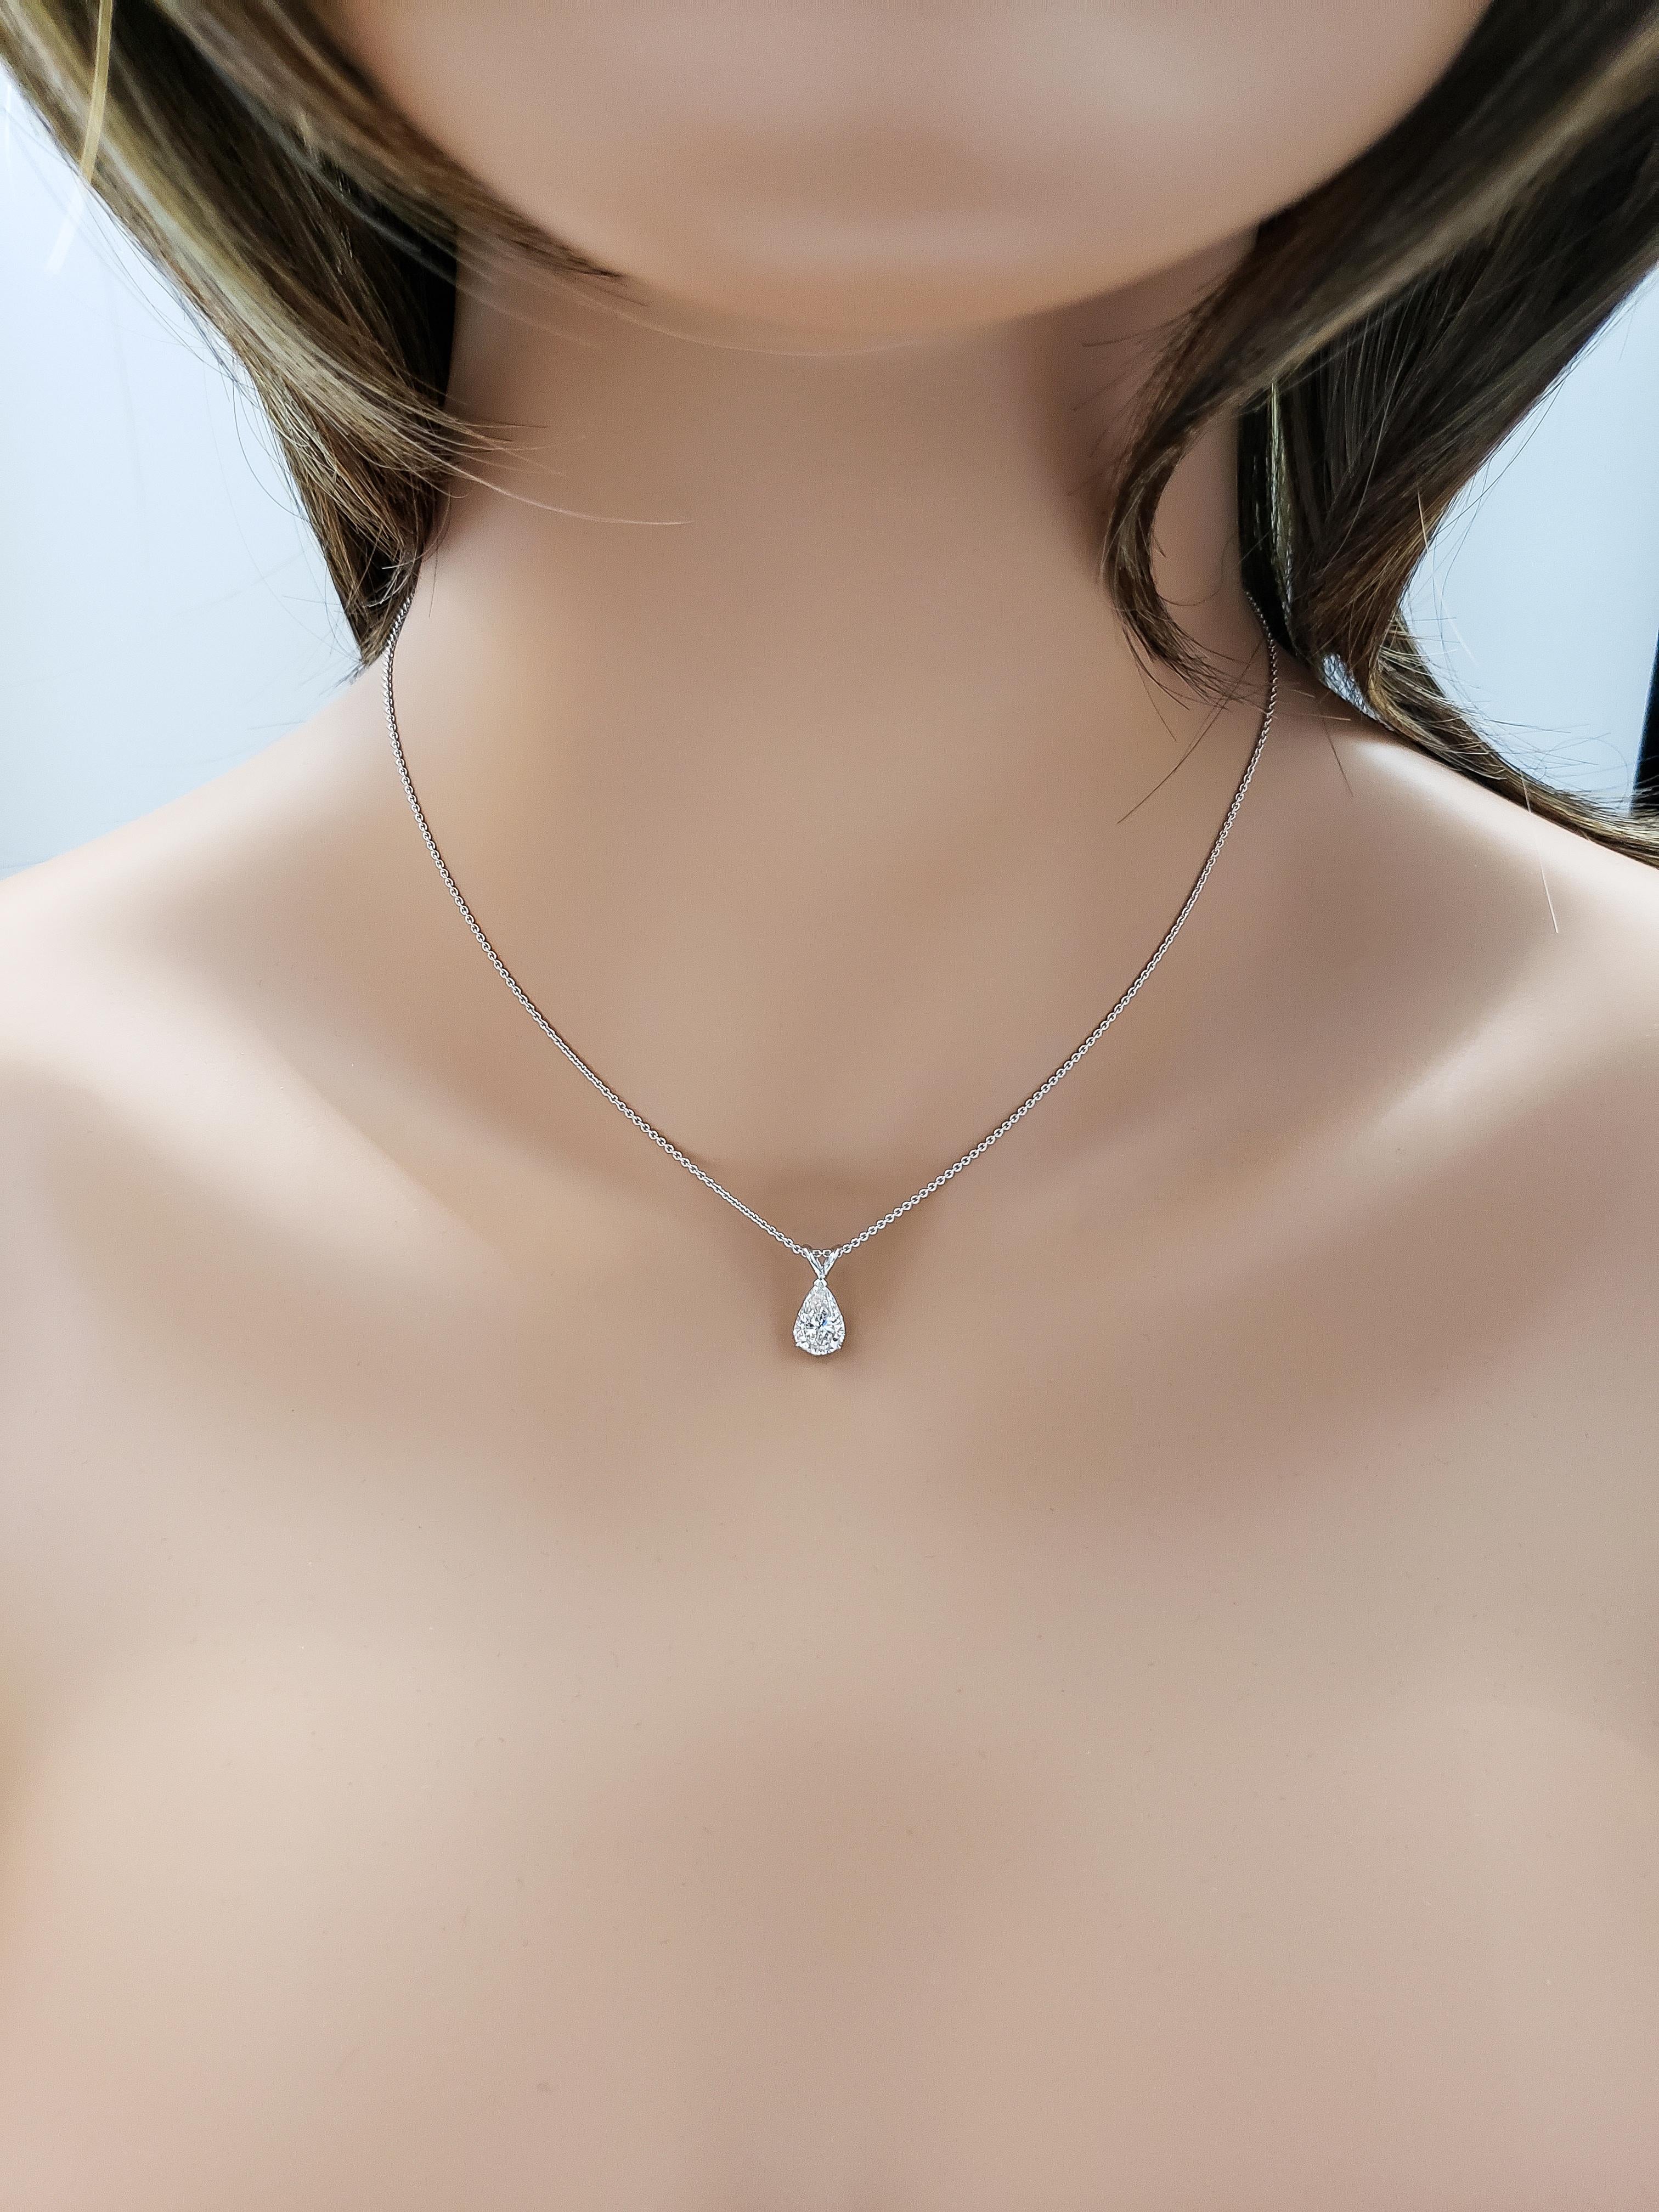 A gorgeous and colorless pear shape diamond weighing 1.64 carats, set in a 14 karat white gold mounting. Attached to a V-bale, suspended on an 18 inch white gold chain (adjustable upon request).

Style available in different price ranges. Prices are